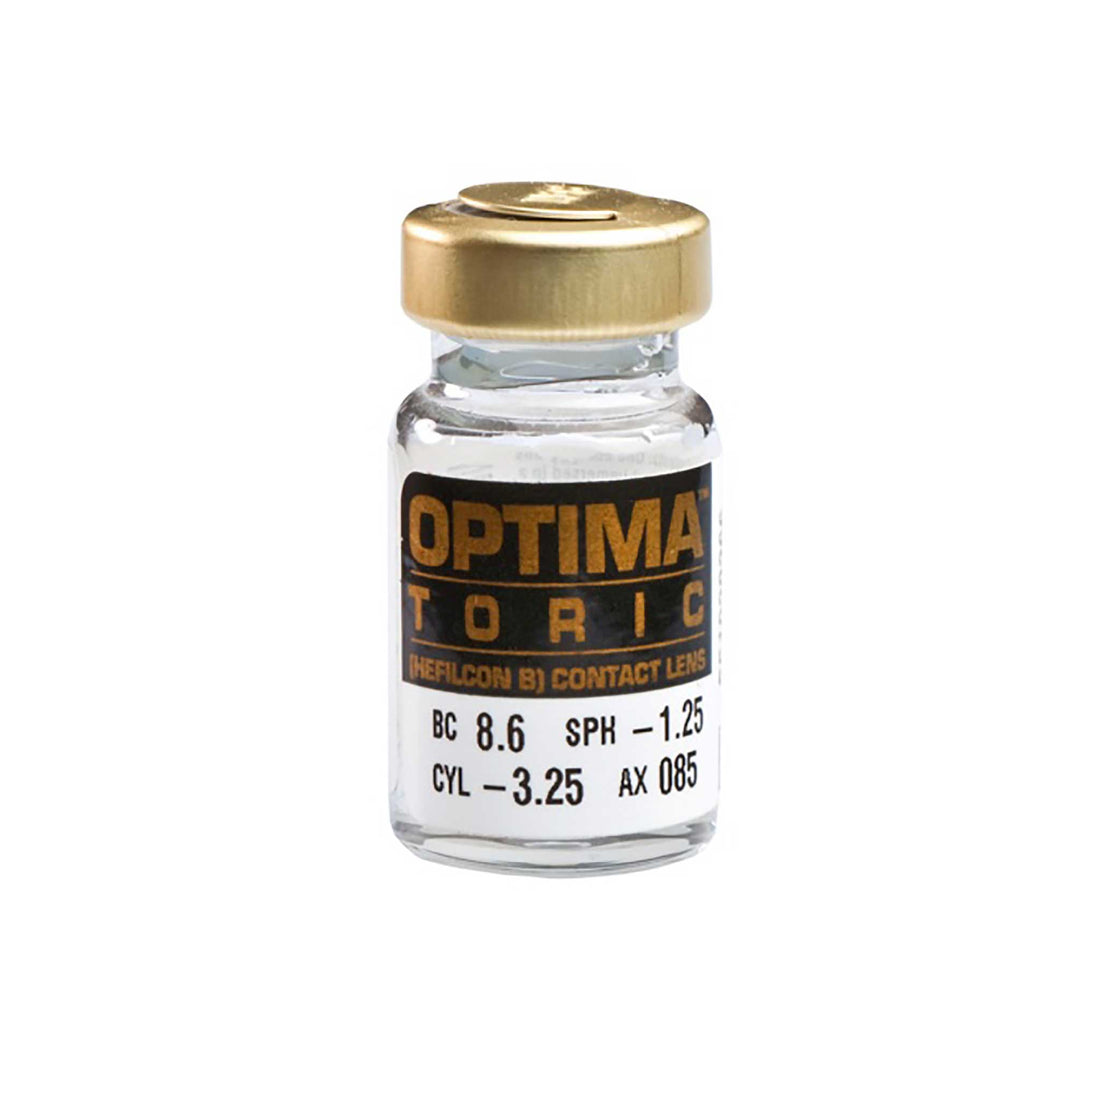 Optima® Toric (made to order) vial